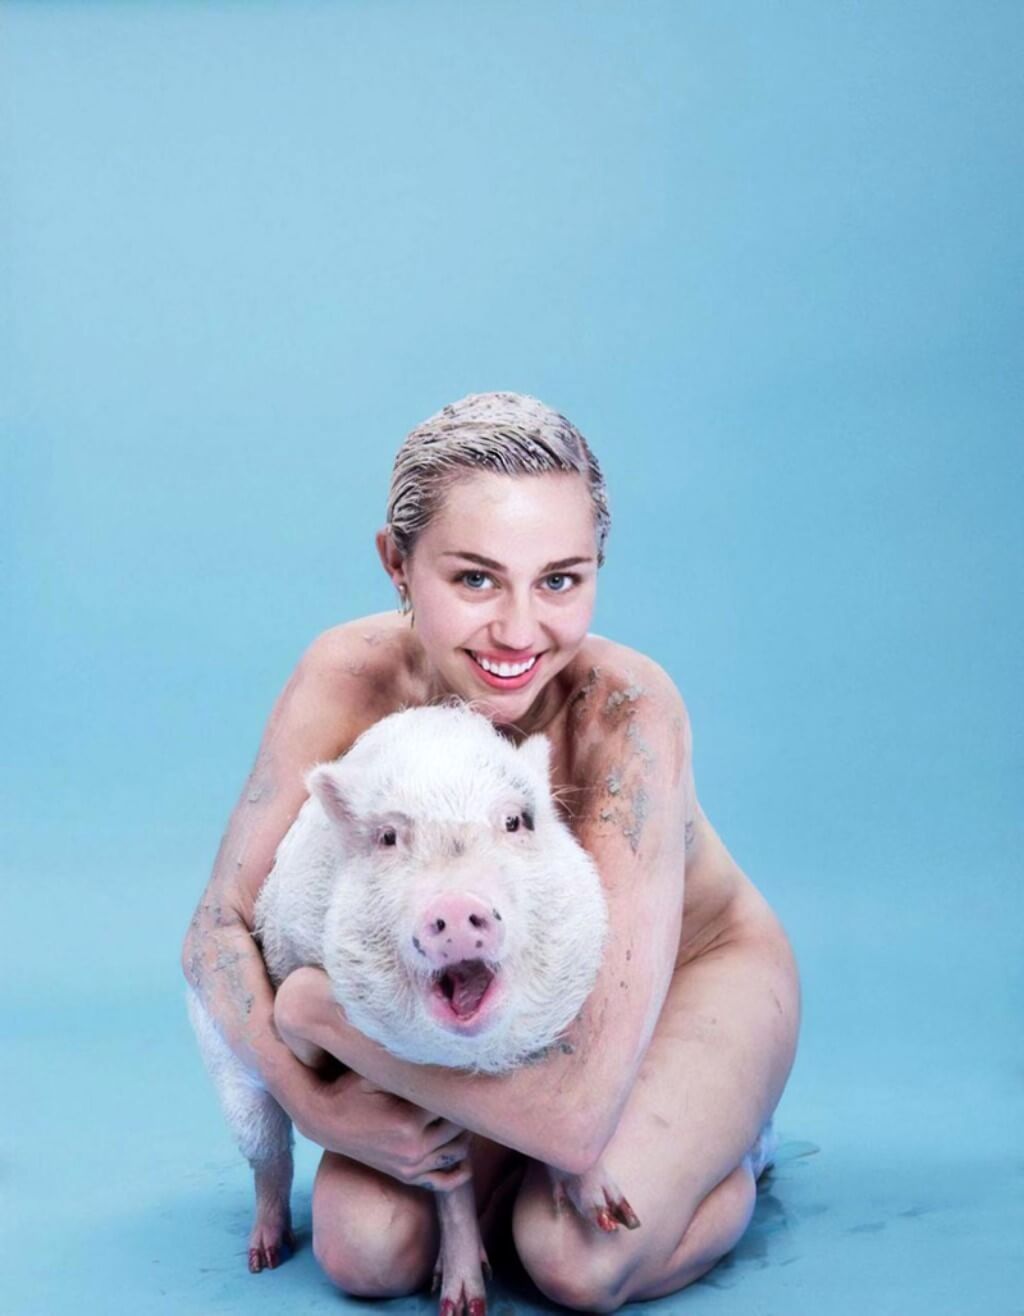 Miley Cyrus Big Tits - Top 50: Miley Cyrus Nude Pussy & Tits Pictures (2023)